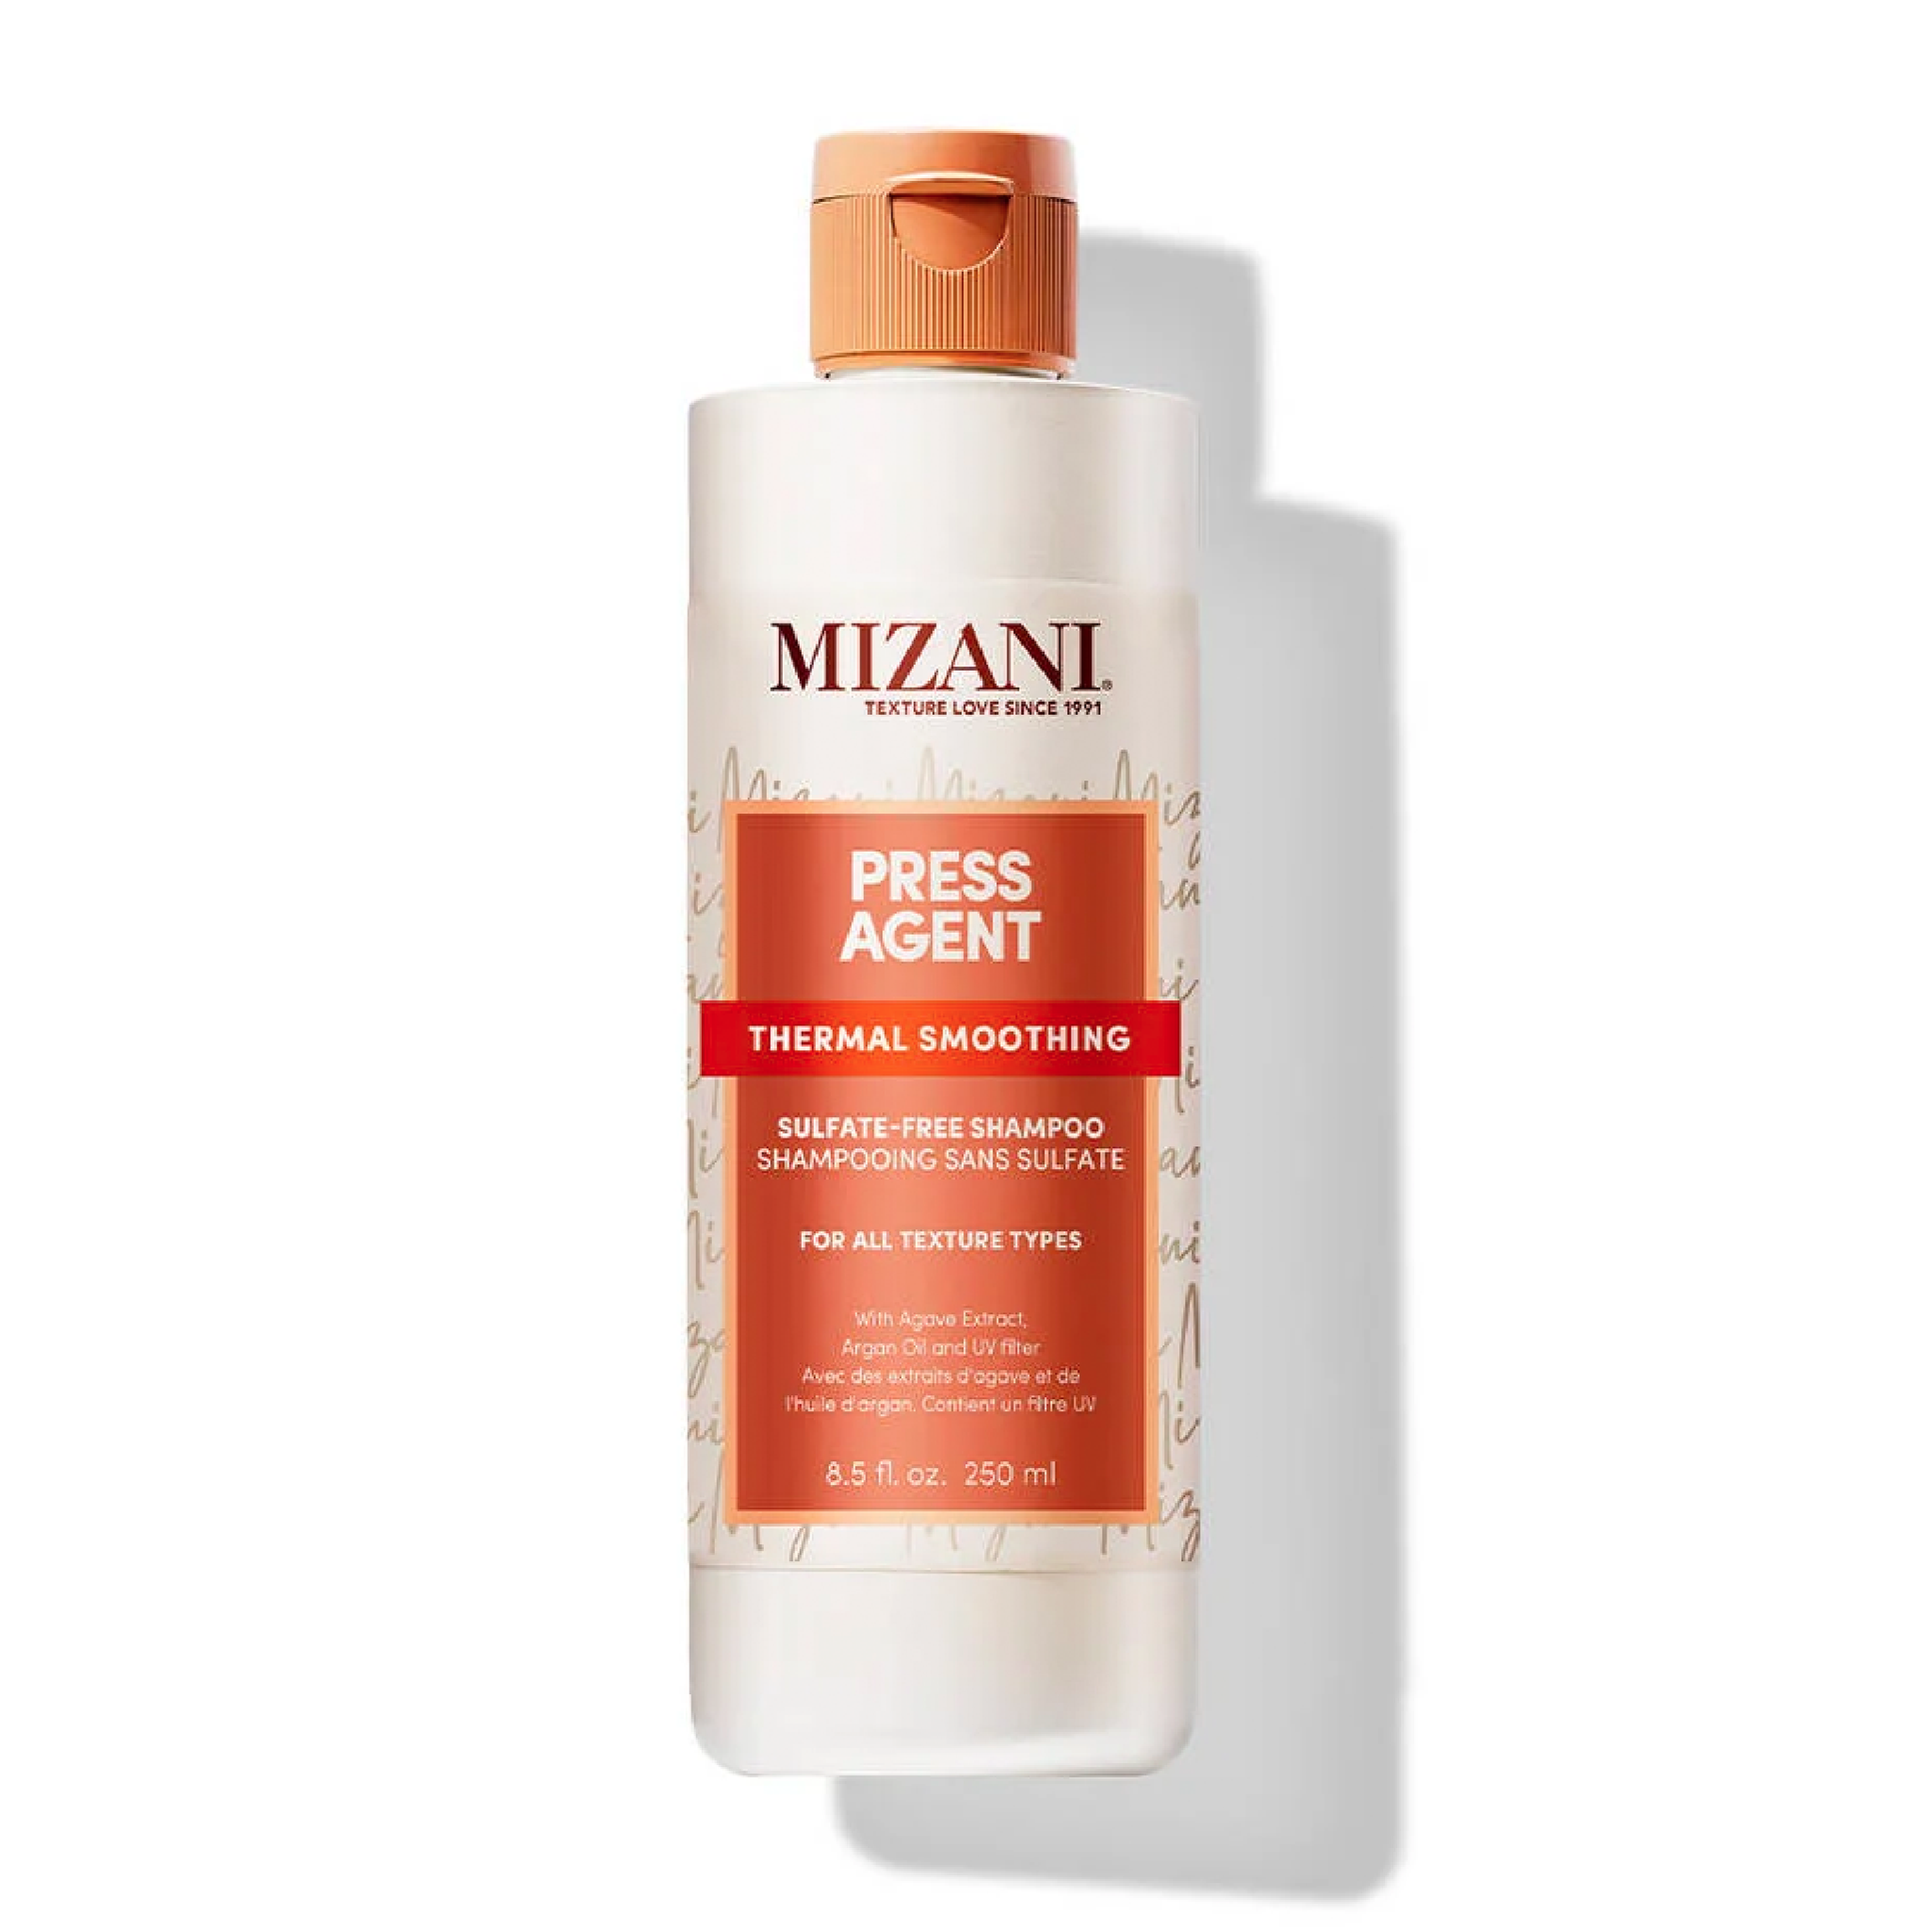 Press Agent Thermal Smoothing Sulfate-Free Shampoo